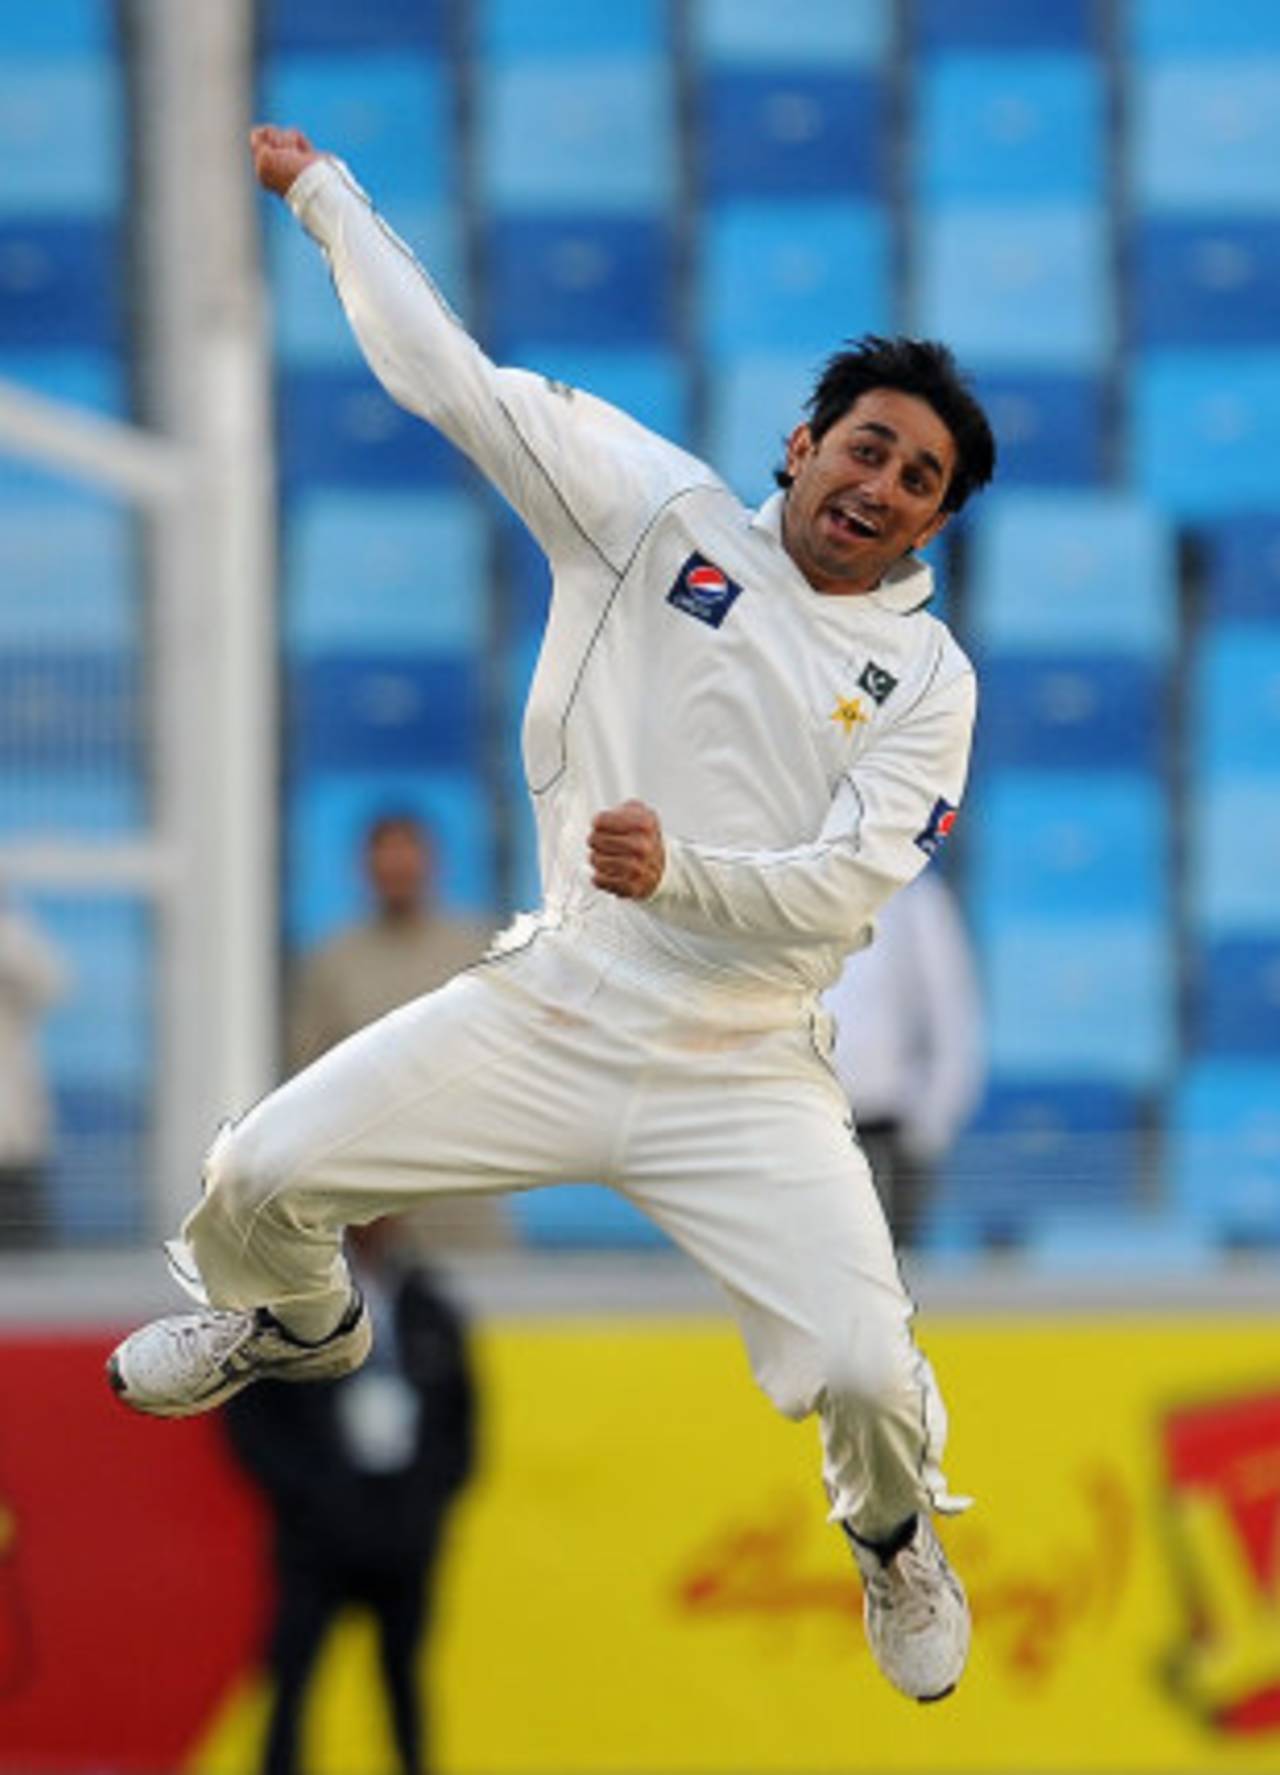 Saeed Ajmail was delirious with his 10 wickets in the match, helping Pakistan to a big victory, Pakistan v England, 1st Test, Dubai, 3rd day, January 19, 2012